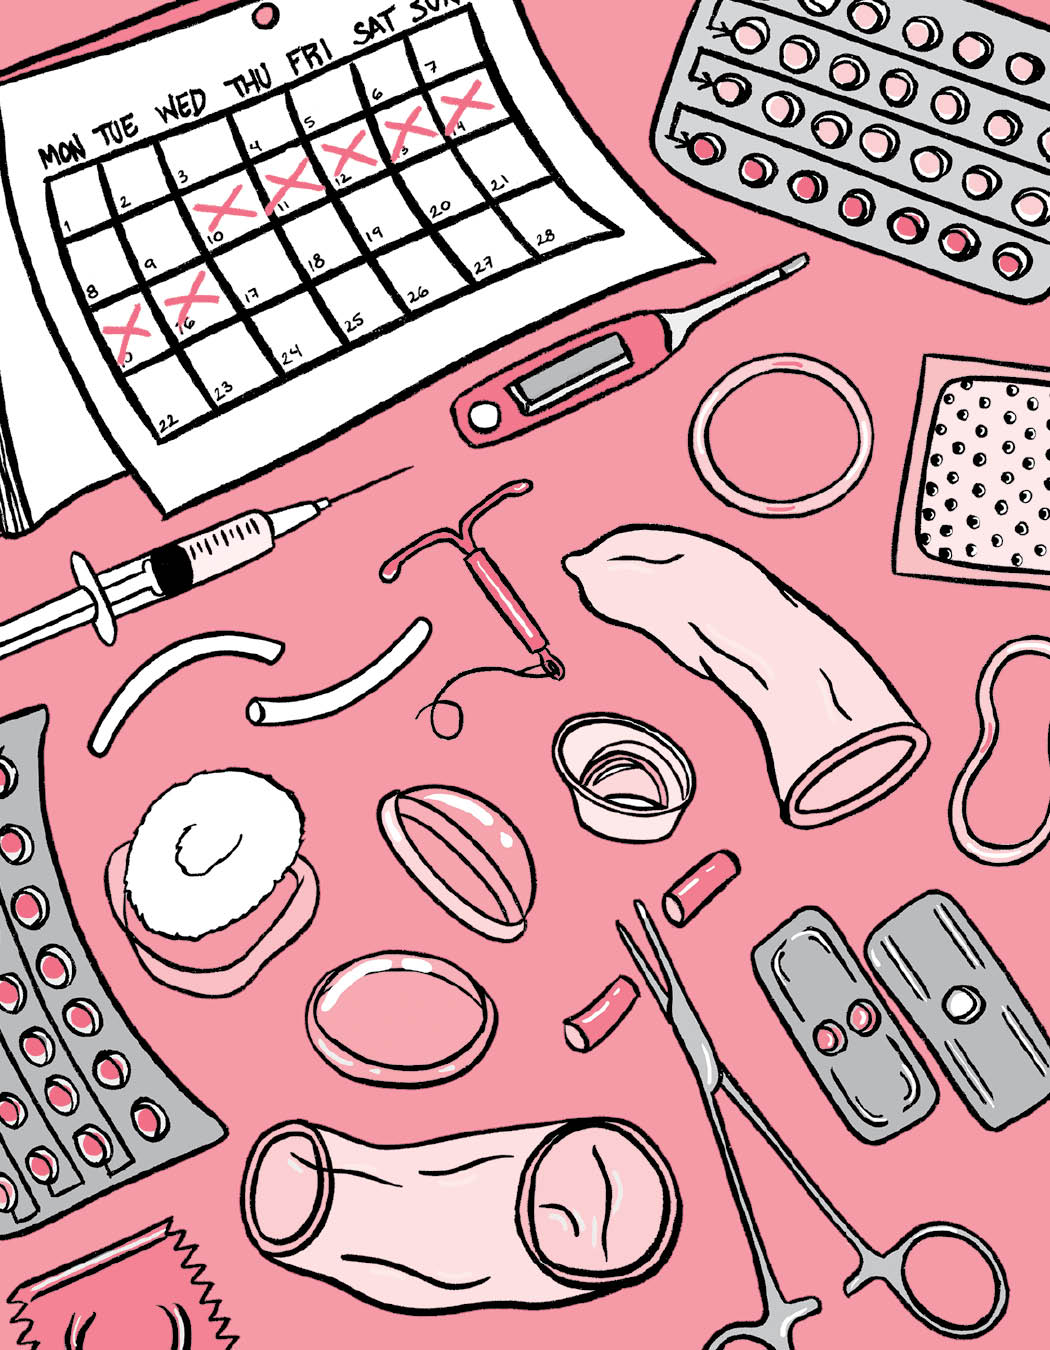 Illustration of birth control methods by María Conejo from Pussypedia